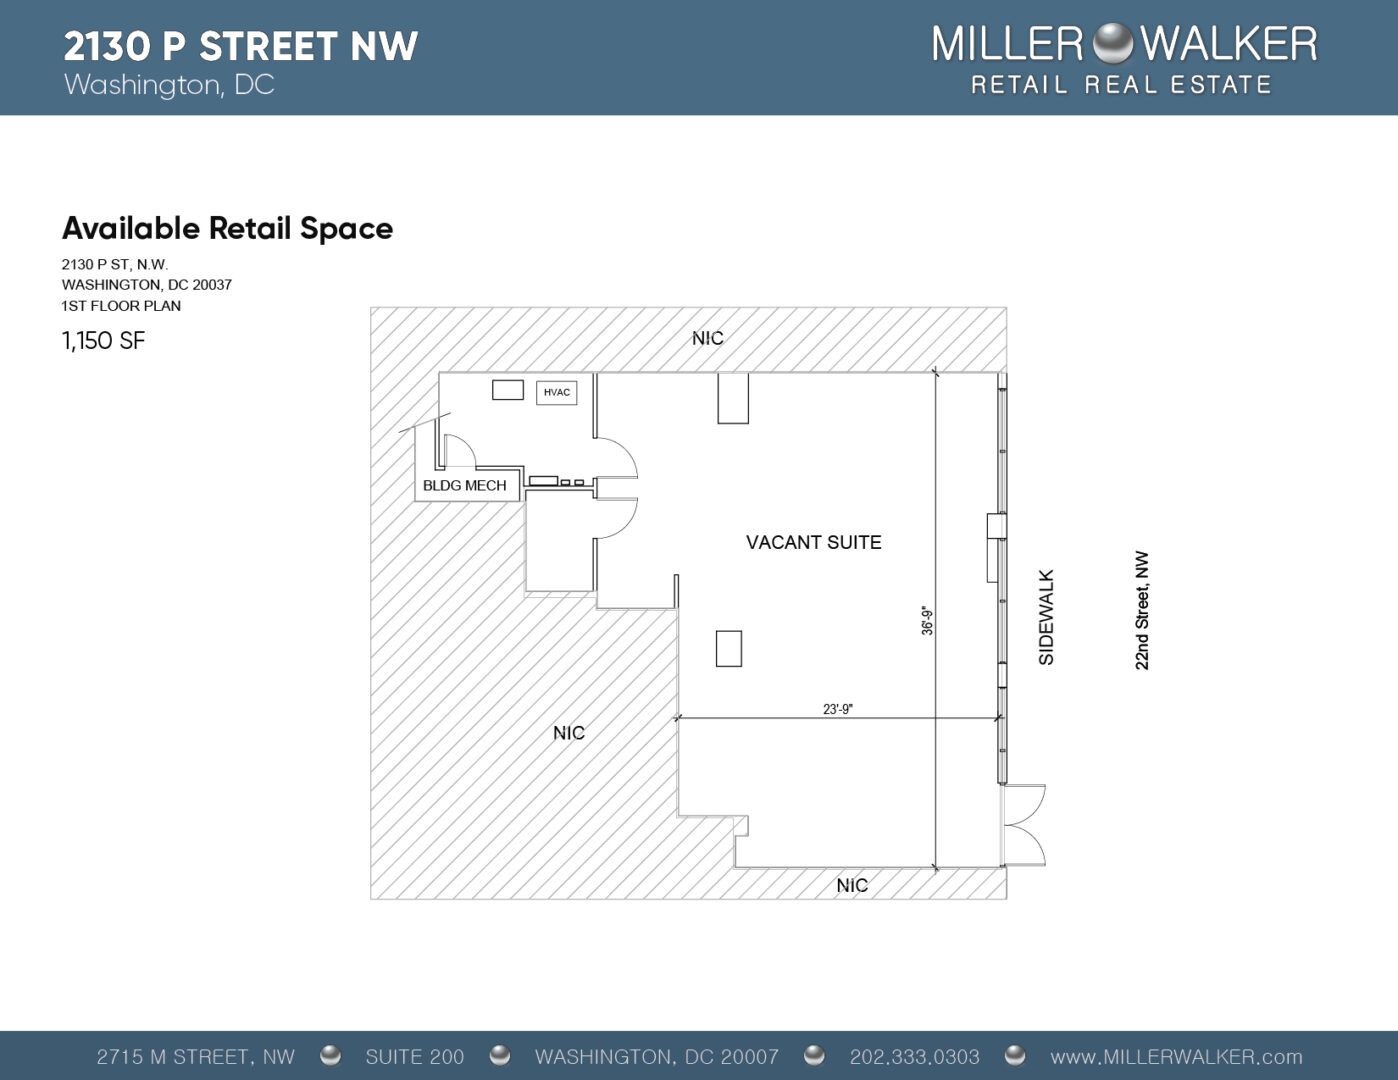 Restaurant and Retail Space for Lease DC - 2130 P Street - Dupont Circle restaurant space for lease floor plan 2